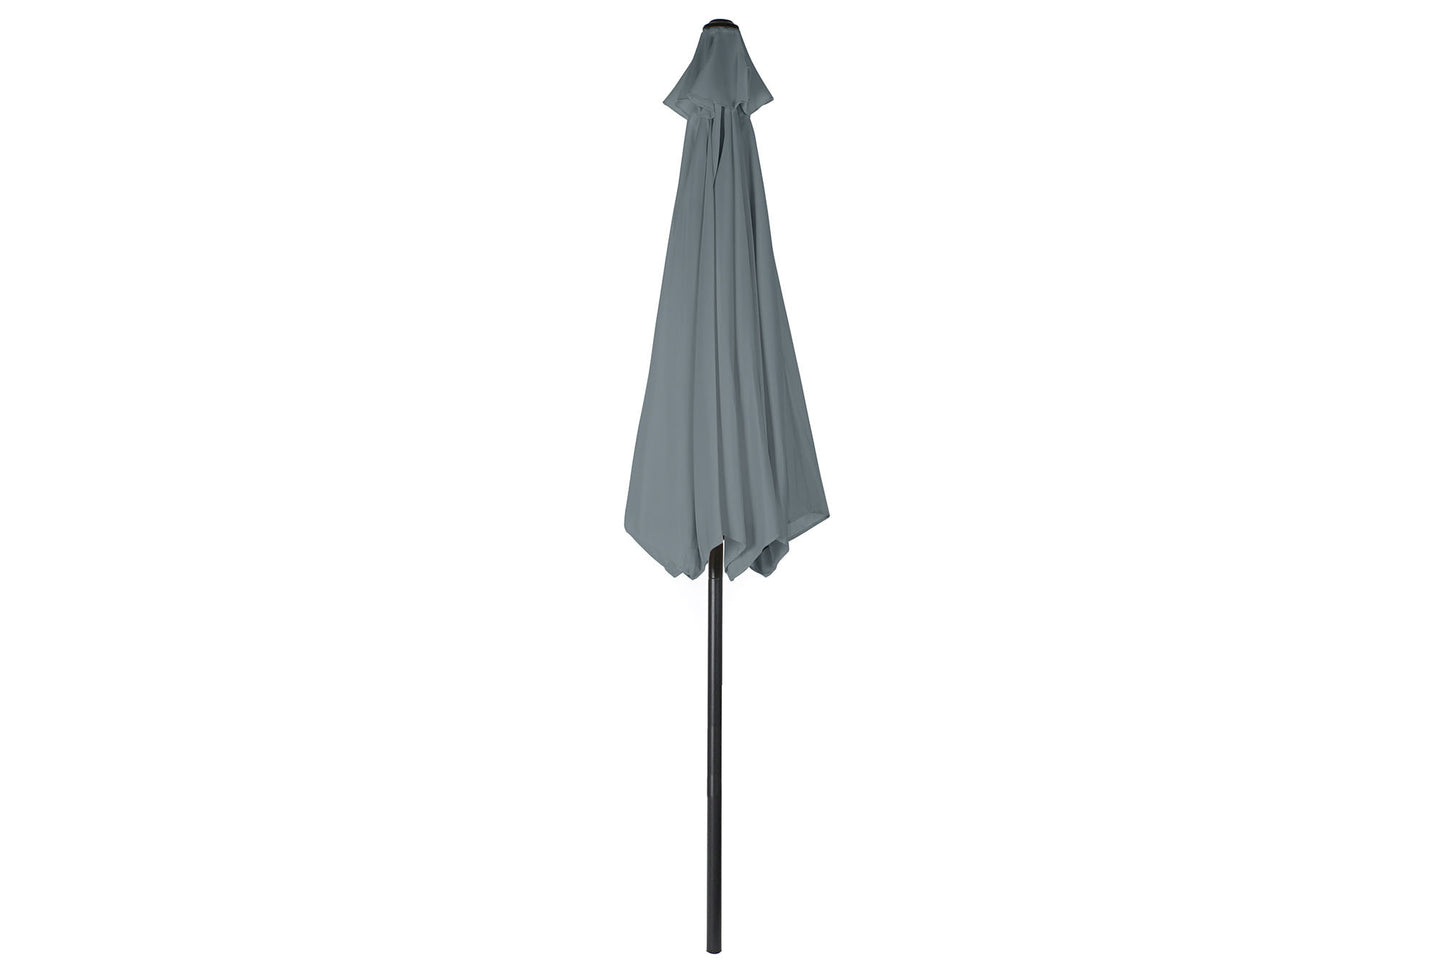 Parasol Inclinable Gris